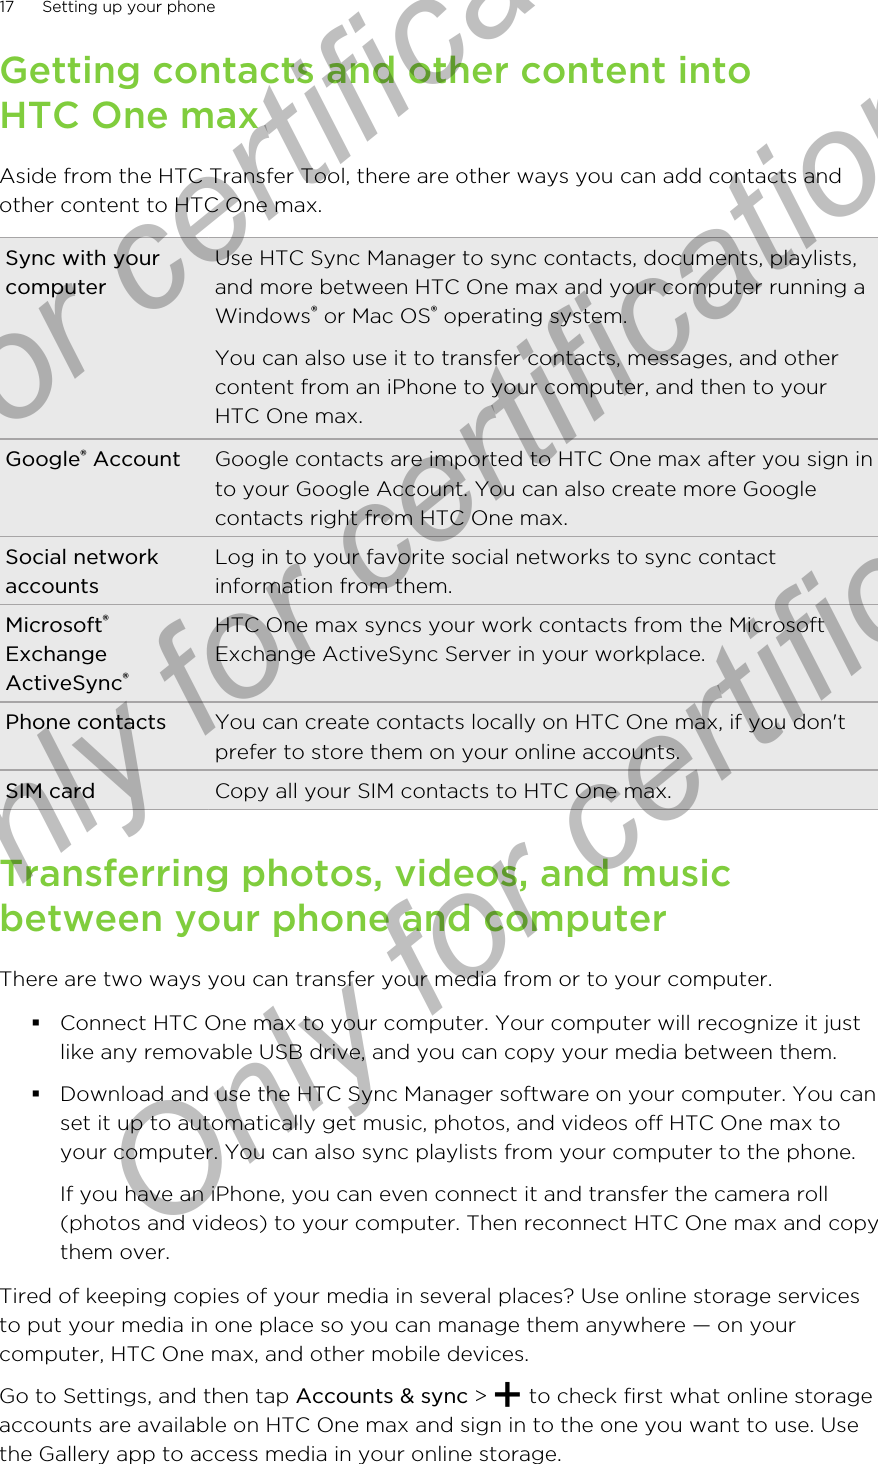 Getting contacts and other content intoHTC One maxAside from the HTC Transfer Tool, there are other ways you can add contacts andother content to HTC One max.Sync with yourcomputerUse HTC Sync Manager to sync contacts, documents, playlists,and more between HTC One max and your computer running aWindows® or Mac OS® operating system.You can also use it to transfer contacts, messages, and othercontent from an iPhone to your computer, and then to yourHTC One max.Google® Account Google contacts are imported to HTC One max after you sign into your Google Account. You can also create more Googlecontacts right from HTC One max.Social networkaccountsLog in to your favorite social networks to sync contactinformation from them.Microsoft®ExchangeActiveSync®HTC One max syncs your work contacts from the MicrosoftExchange ActiveSync Server in your workplace.Phone contacts You can create contacts locally on HTC One max, if you don&apos;tprefer to store them on your online accounts.SIM card Copy all your SIM contacts to HTC One max.Transferring photos, videos, and musicbetween your phone and computerThere are two ways you can transfer your media from or to your computer.§Connect HTC One max to your computer. Your computer will recognize it justlike any removable USB drive, and you can copy your media between them.§Download and use the HTC Sync Manager software on your computer. You canset it up to automatically get music, photos, and videos off HTC One max toyour computer. You can also sync playlists from your computer to the phone.If you have an iPhone, you can even connect it and transfer the camera roll(photos and videos) to your computer. Then reconnect HTC One max and copythem over.Tired of keeping copies of your media in several places? Use online storage servicesto put your media in one place so you can manage them anywhere — on yourcomputer, HTC One max, and other mobile devices.Go to Settings, and then tap Accounts &amp; sync &gt;   to check first what online storageaccounts are available on HTC One max and sign in to the one you want to use. Usethe Gallery app to access media in your online storage.17 Setting up your phoneOnly for certification  Only for certification  Only for certification